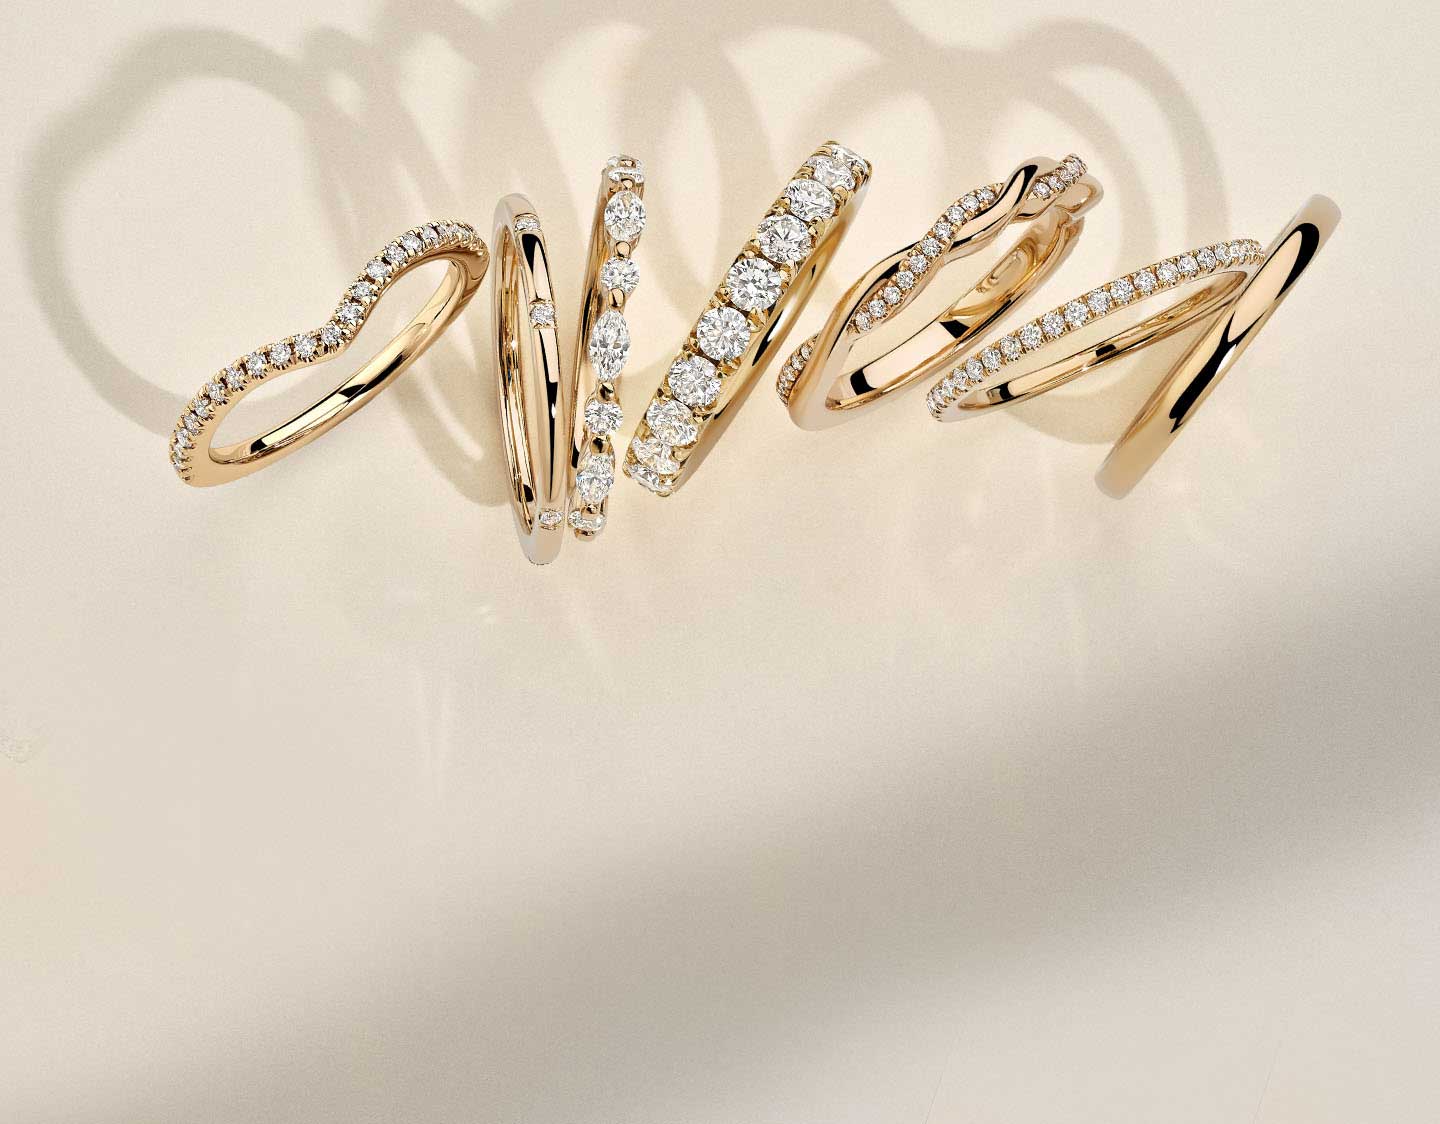 Assortment of gold diamond stacking rings.